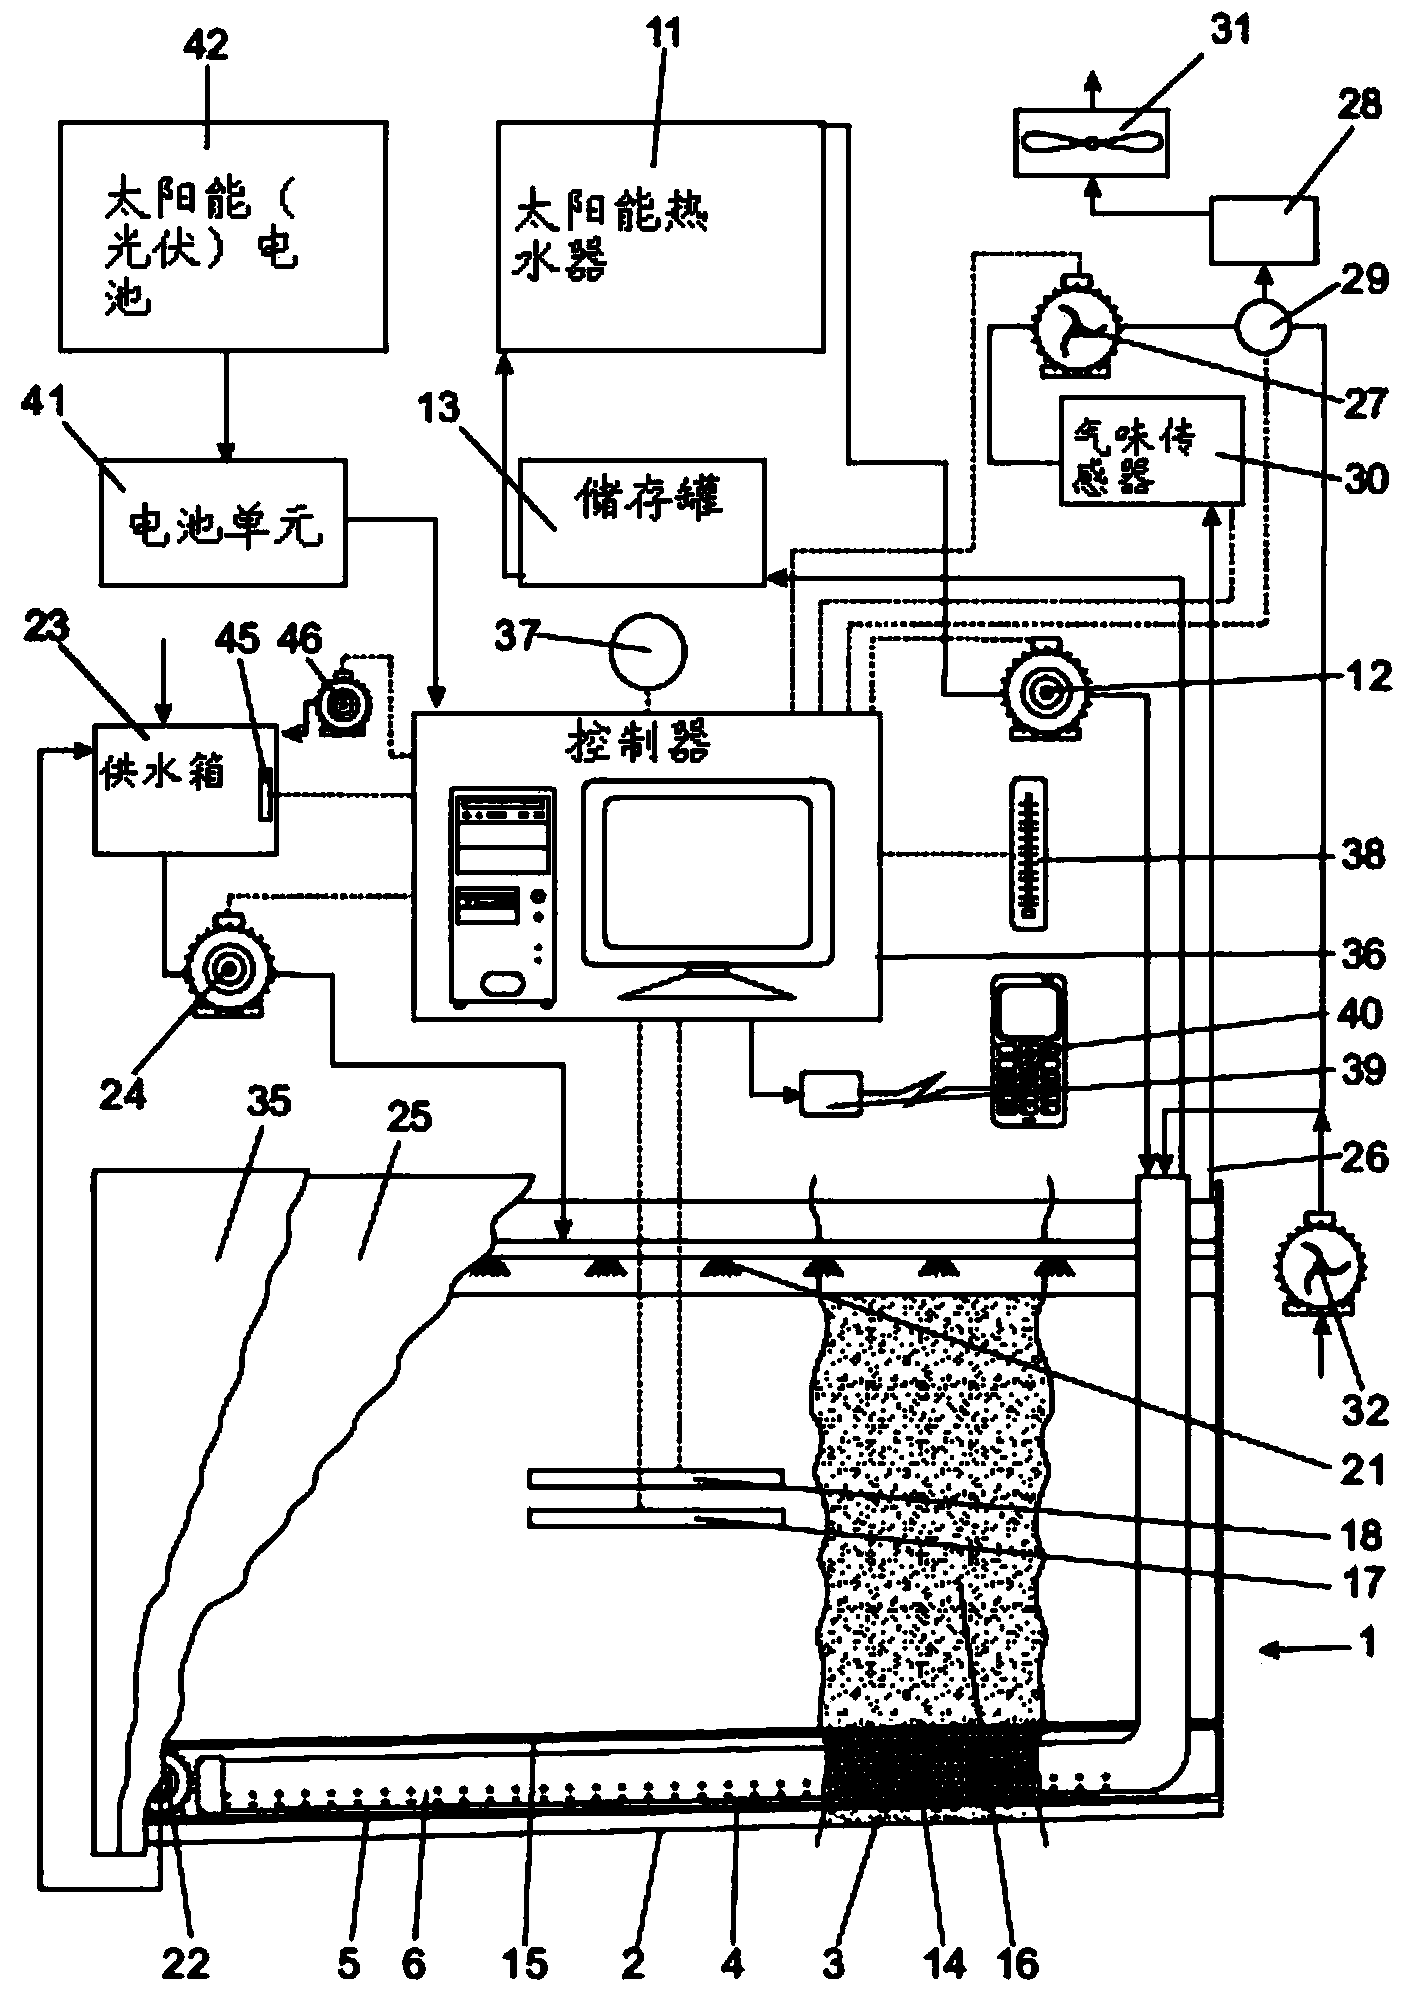 Apparatus and method for conducting microbiological processes